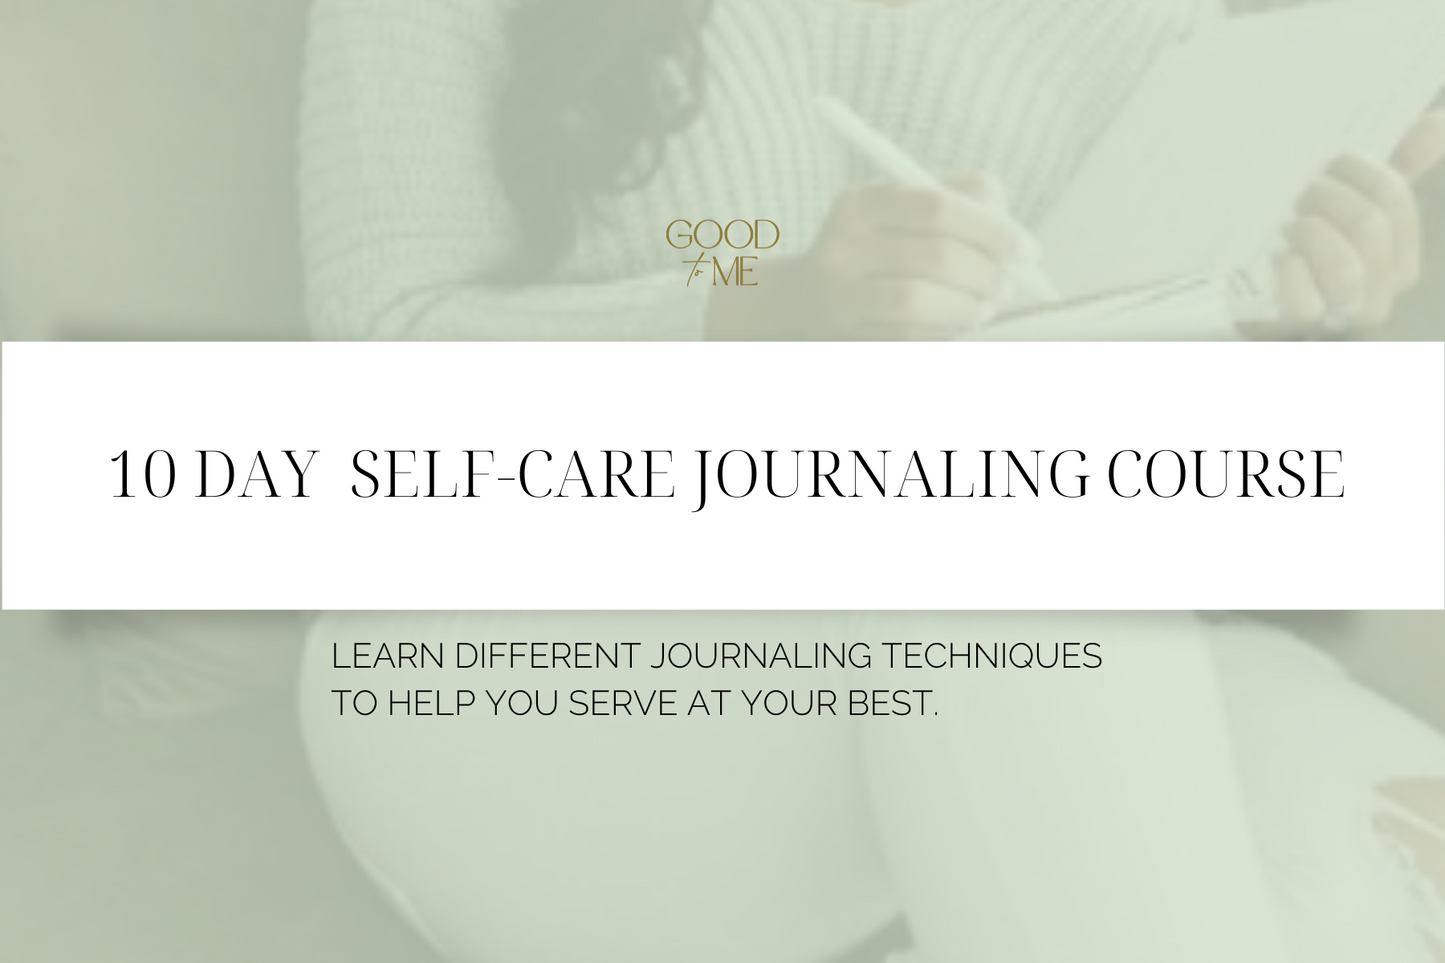 10 Day Self-Care Journaling Course